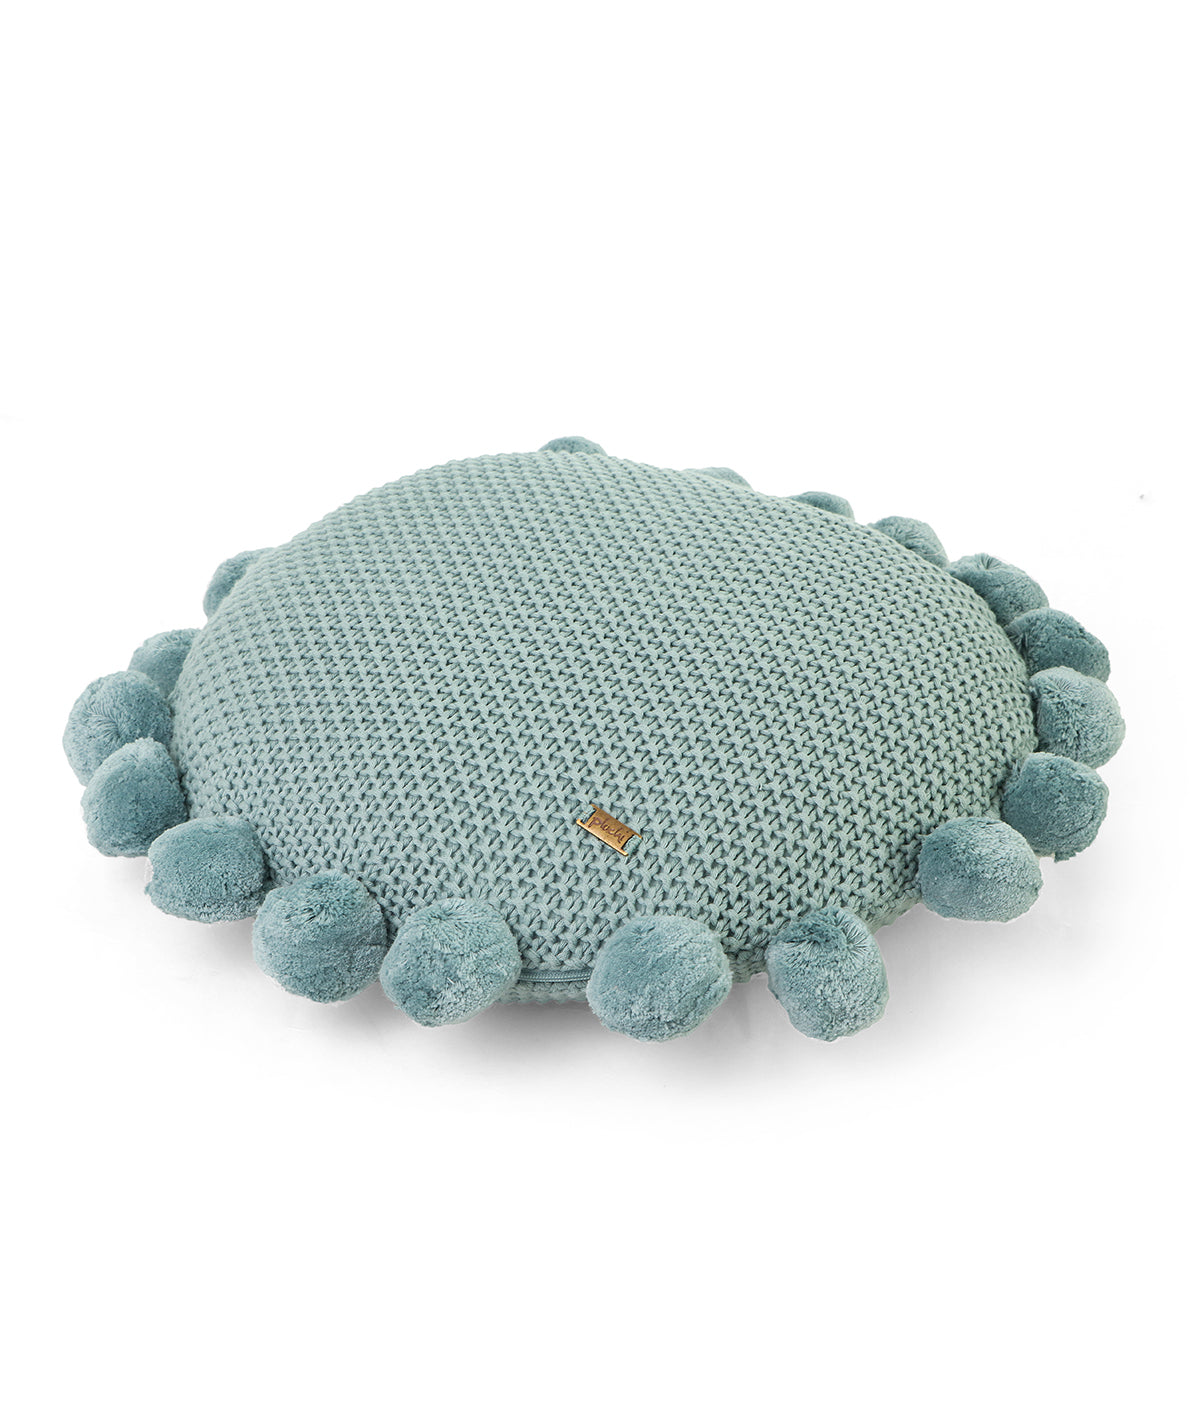 Pom Pom Dull Blue Cotton Knitted Decorative 16 Inches Dia Cushion Cover